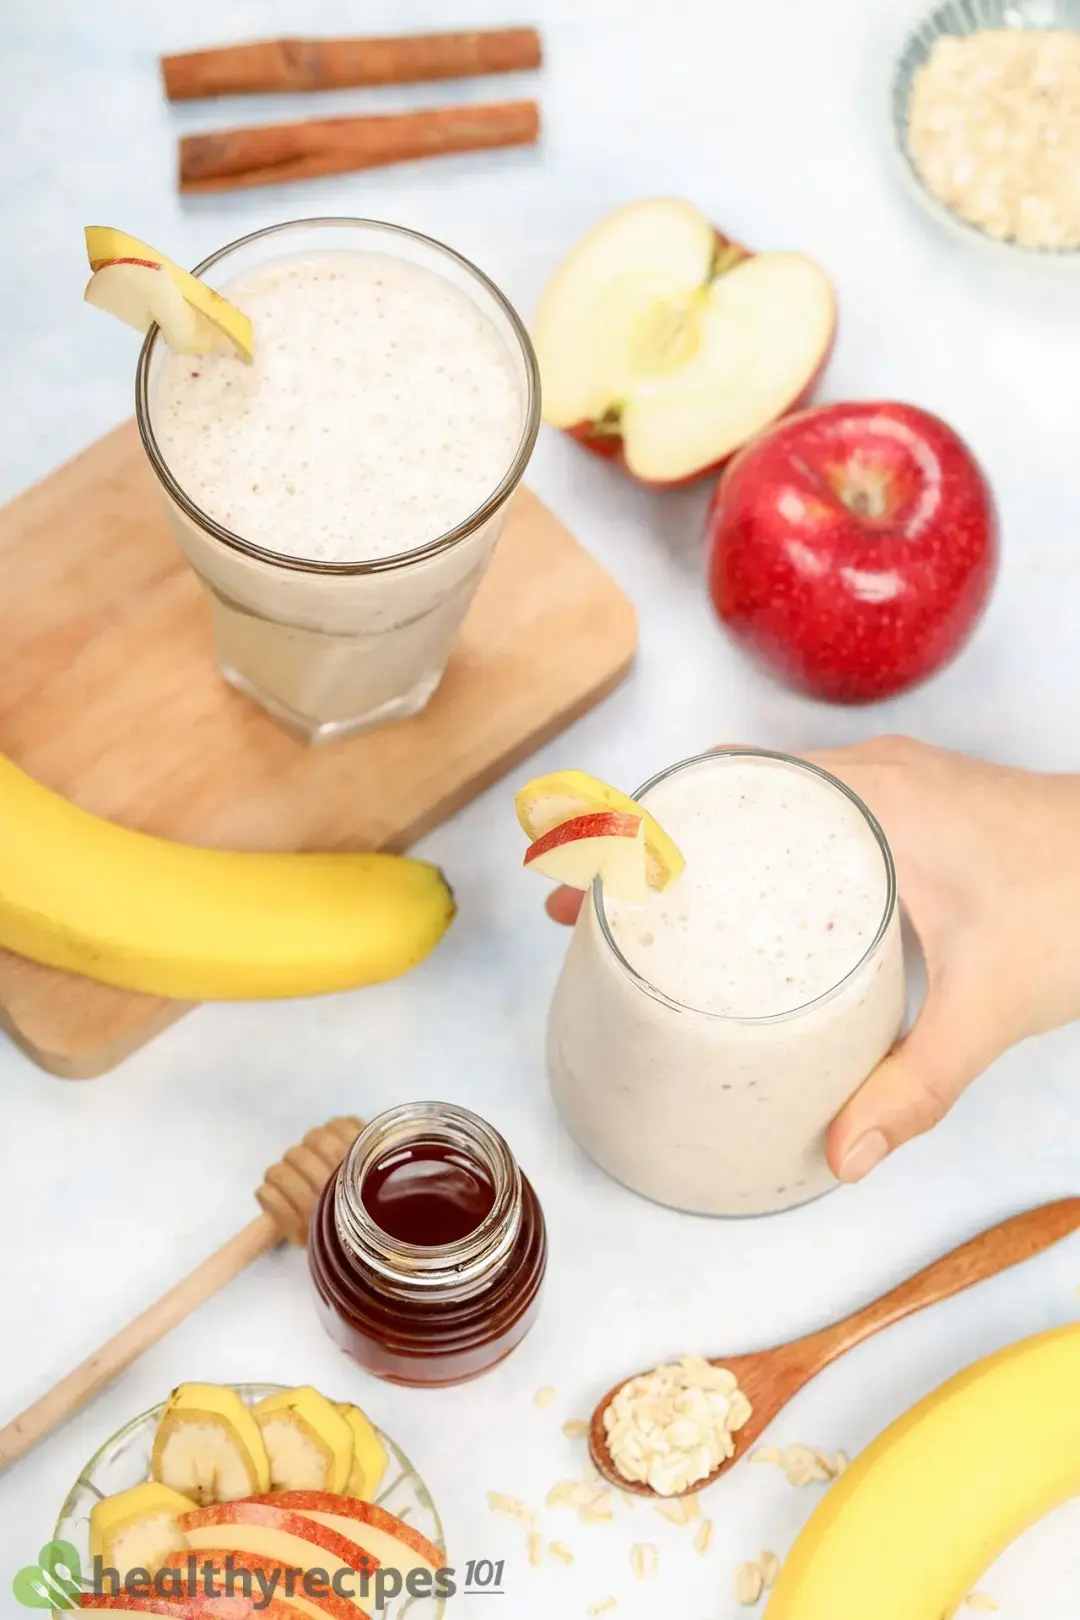 Benefits from Apples Bananas and Oats